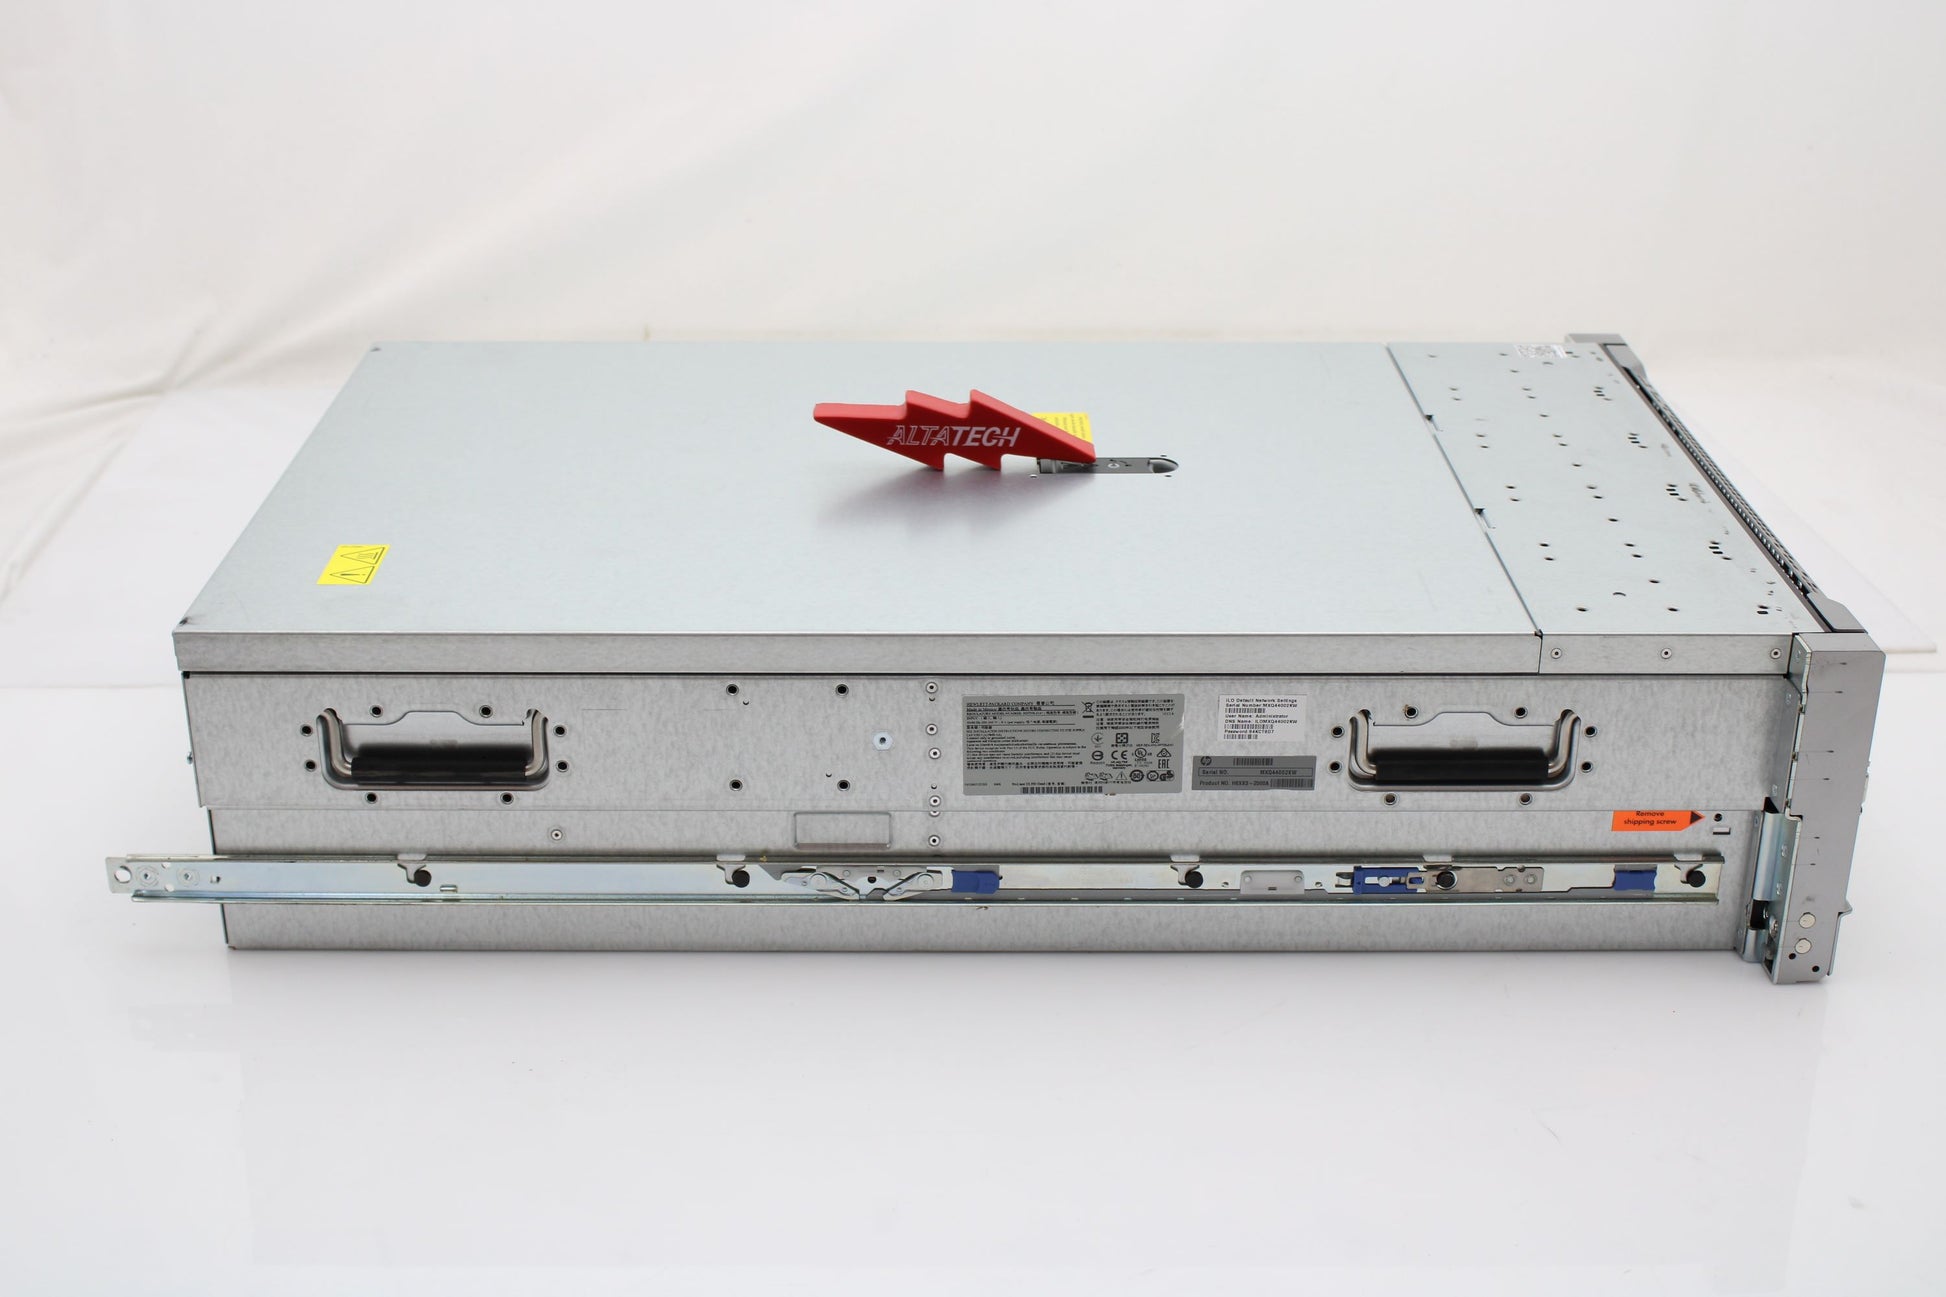 HP 728551-B21 ProLiant DL580 G8 5x SFF CTO Chassis, Used